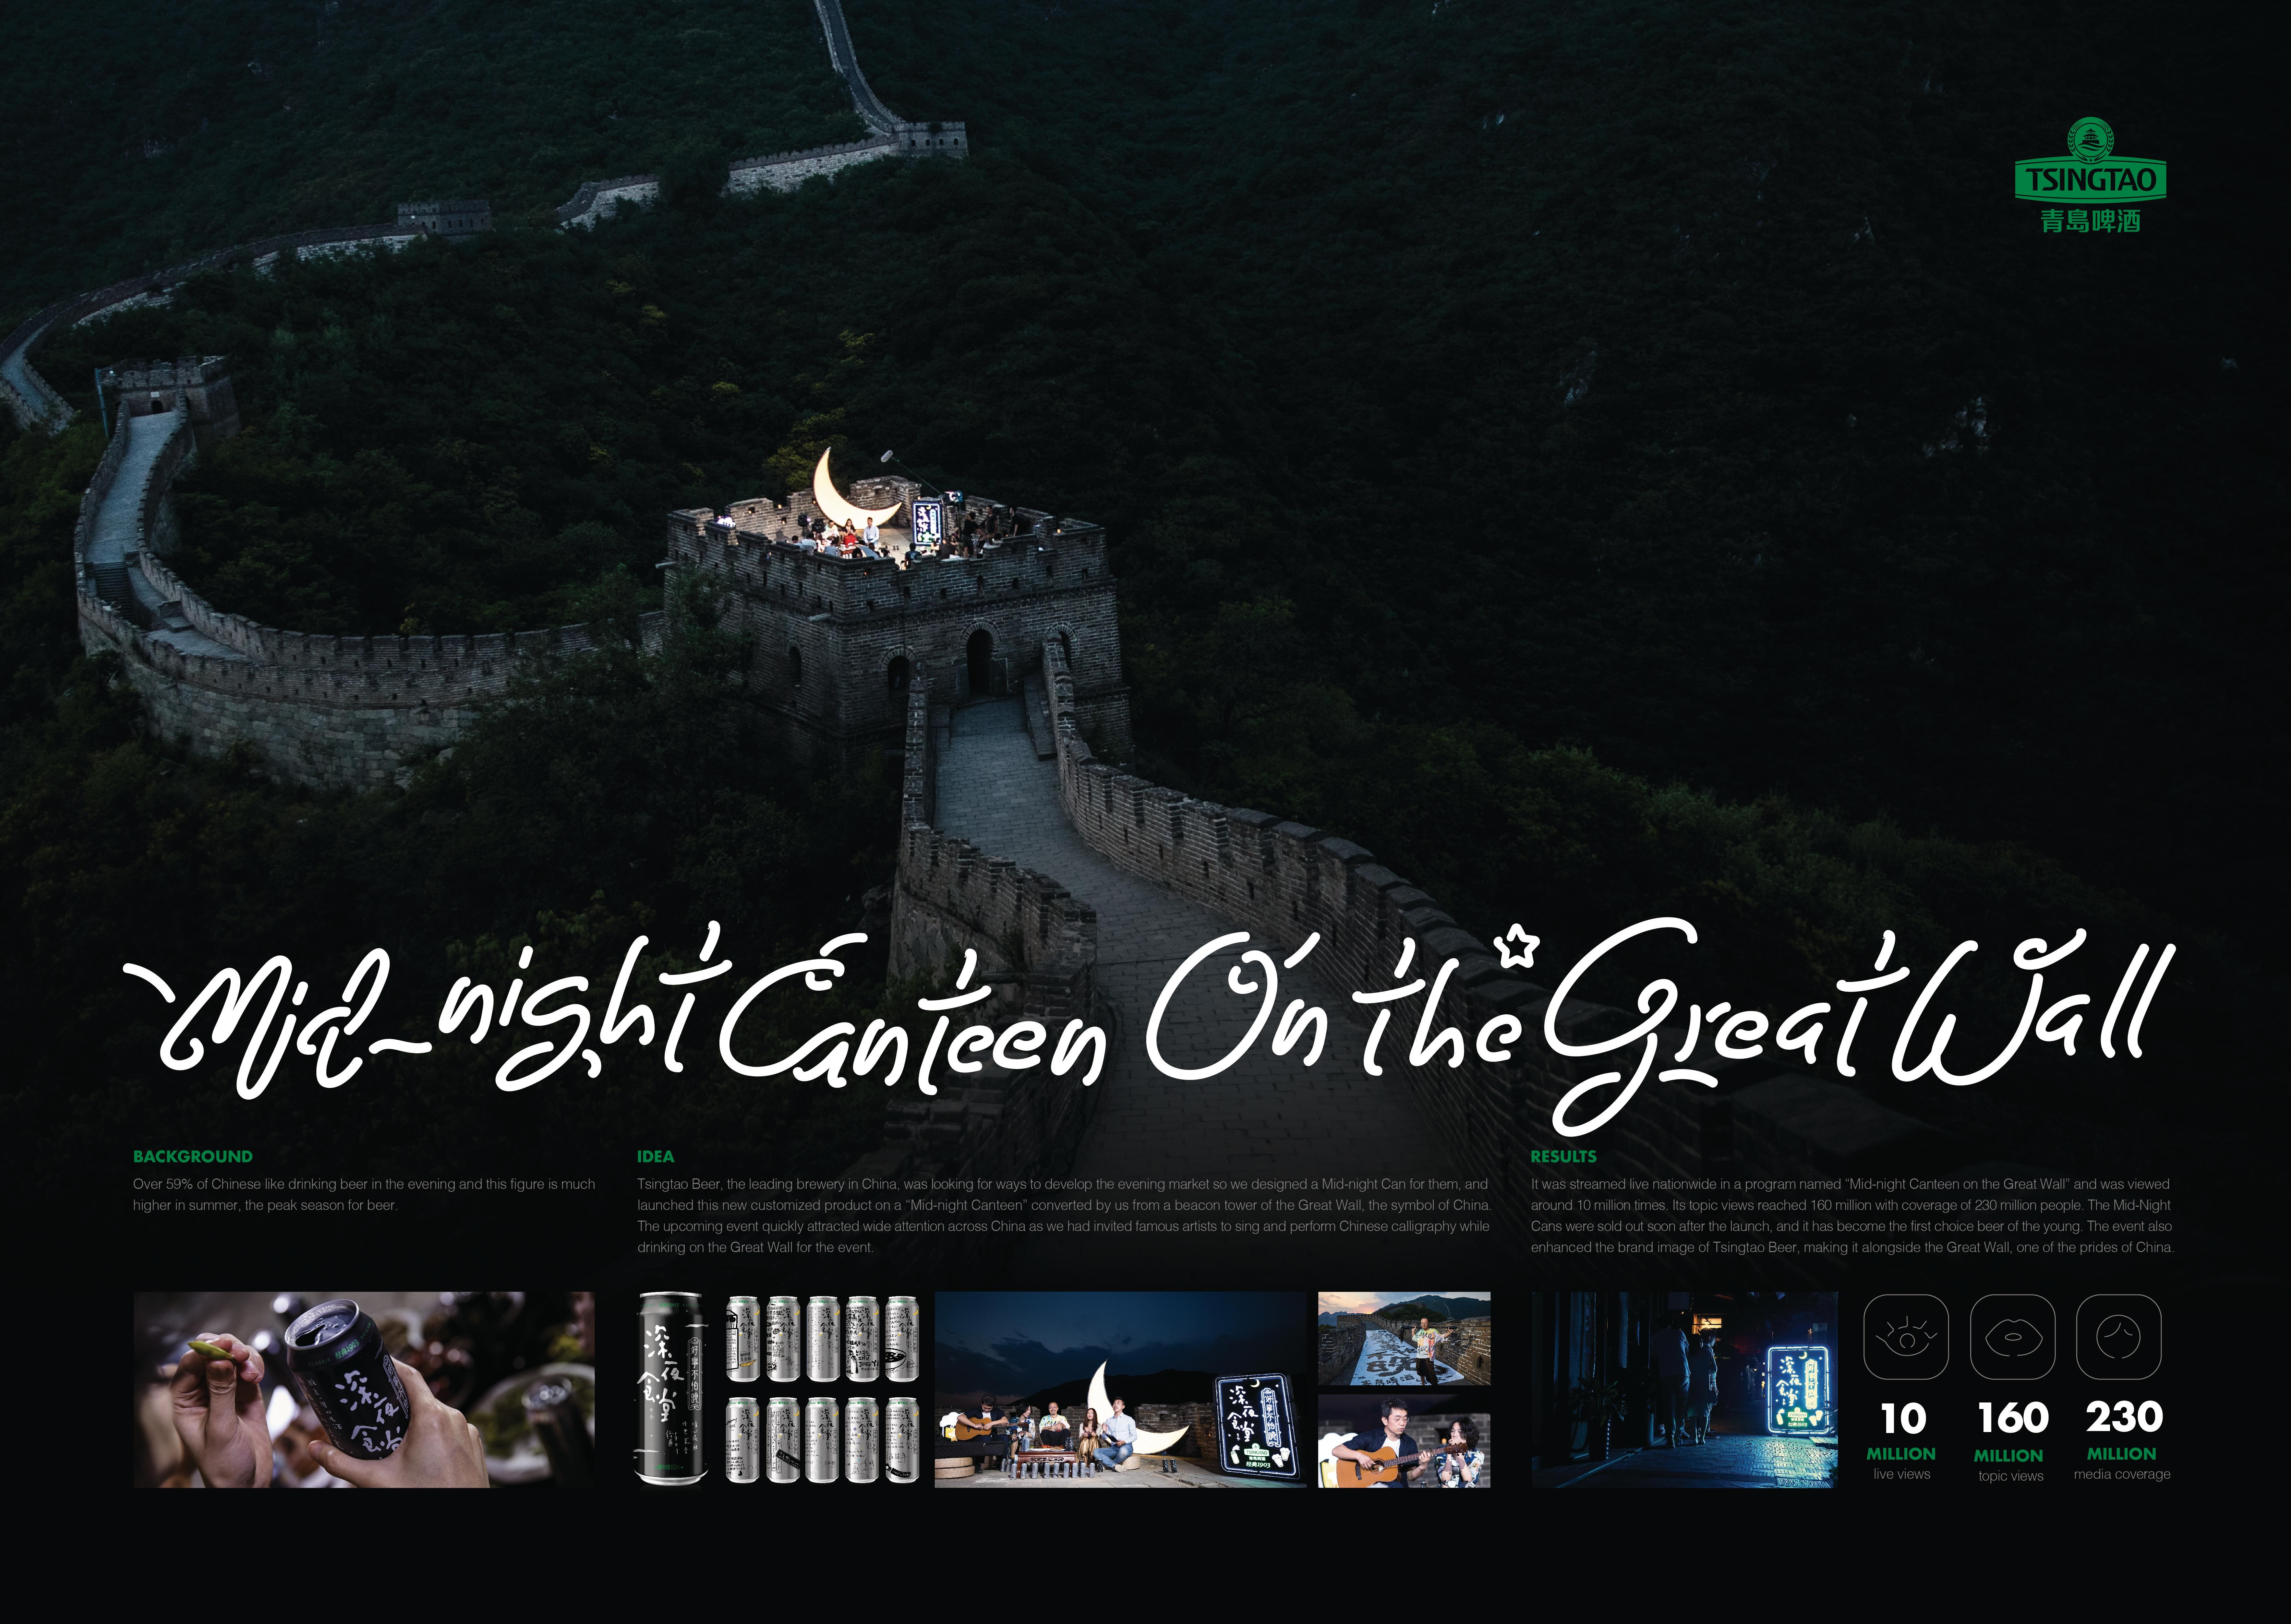 The Mid-night Canteen on the Great Wall